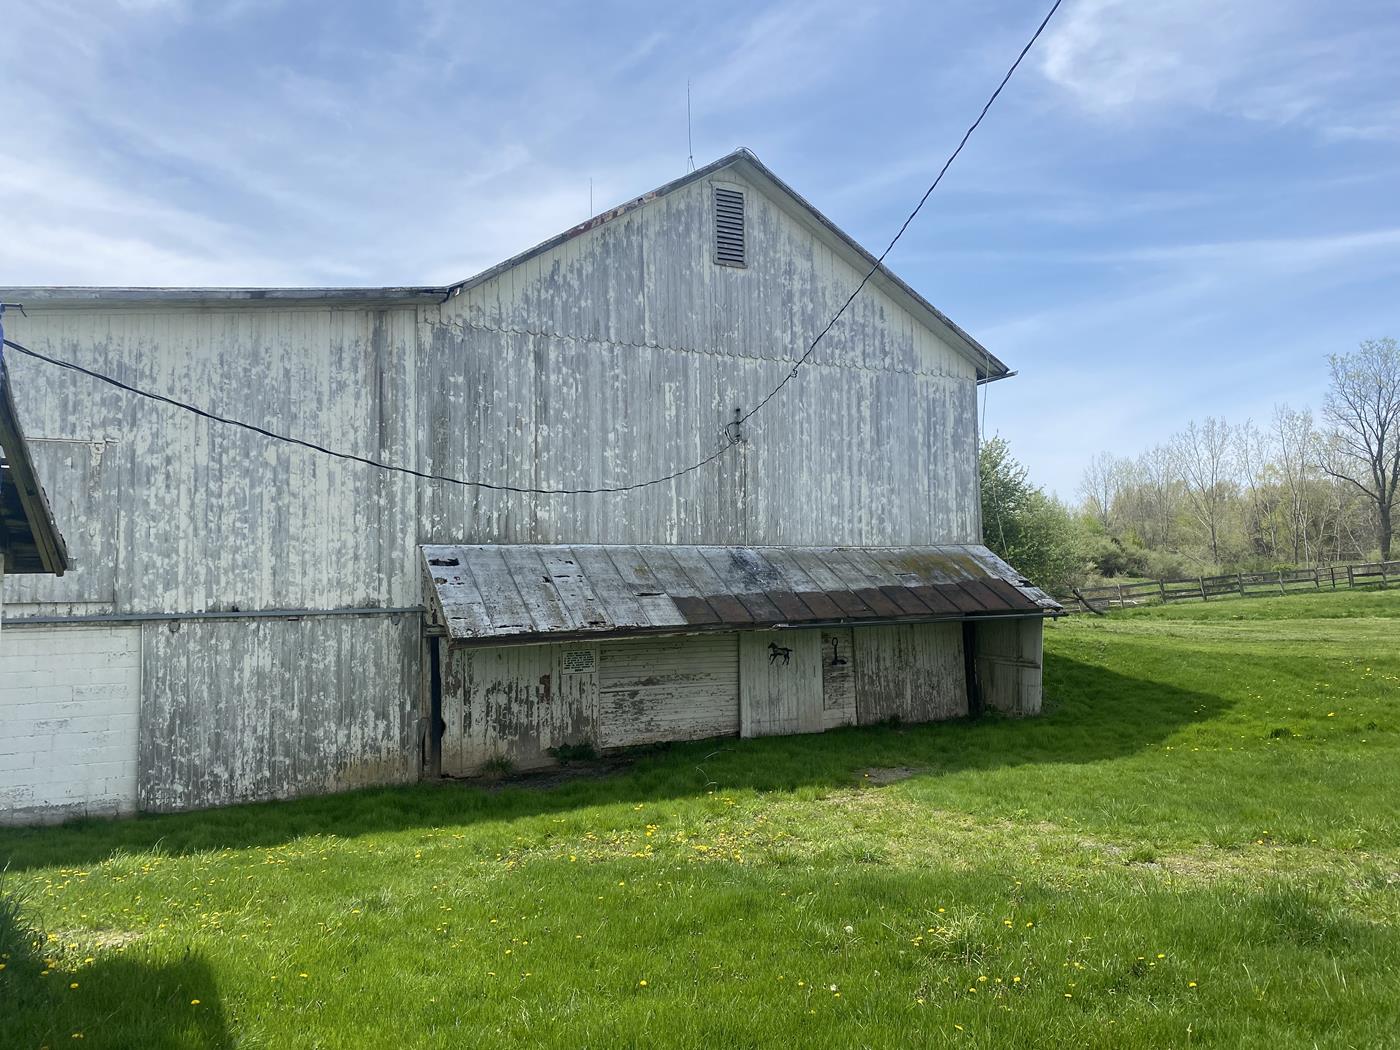 https://www.ohiovalleybarnsalvage.com/images/Marlatt Historic Ohio Barn Frame For Sale - Your Source For Reclaimed Barn Siding